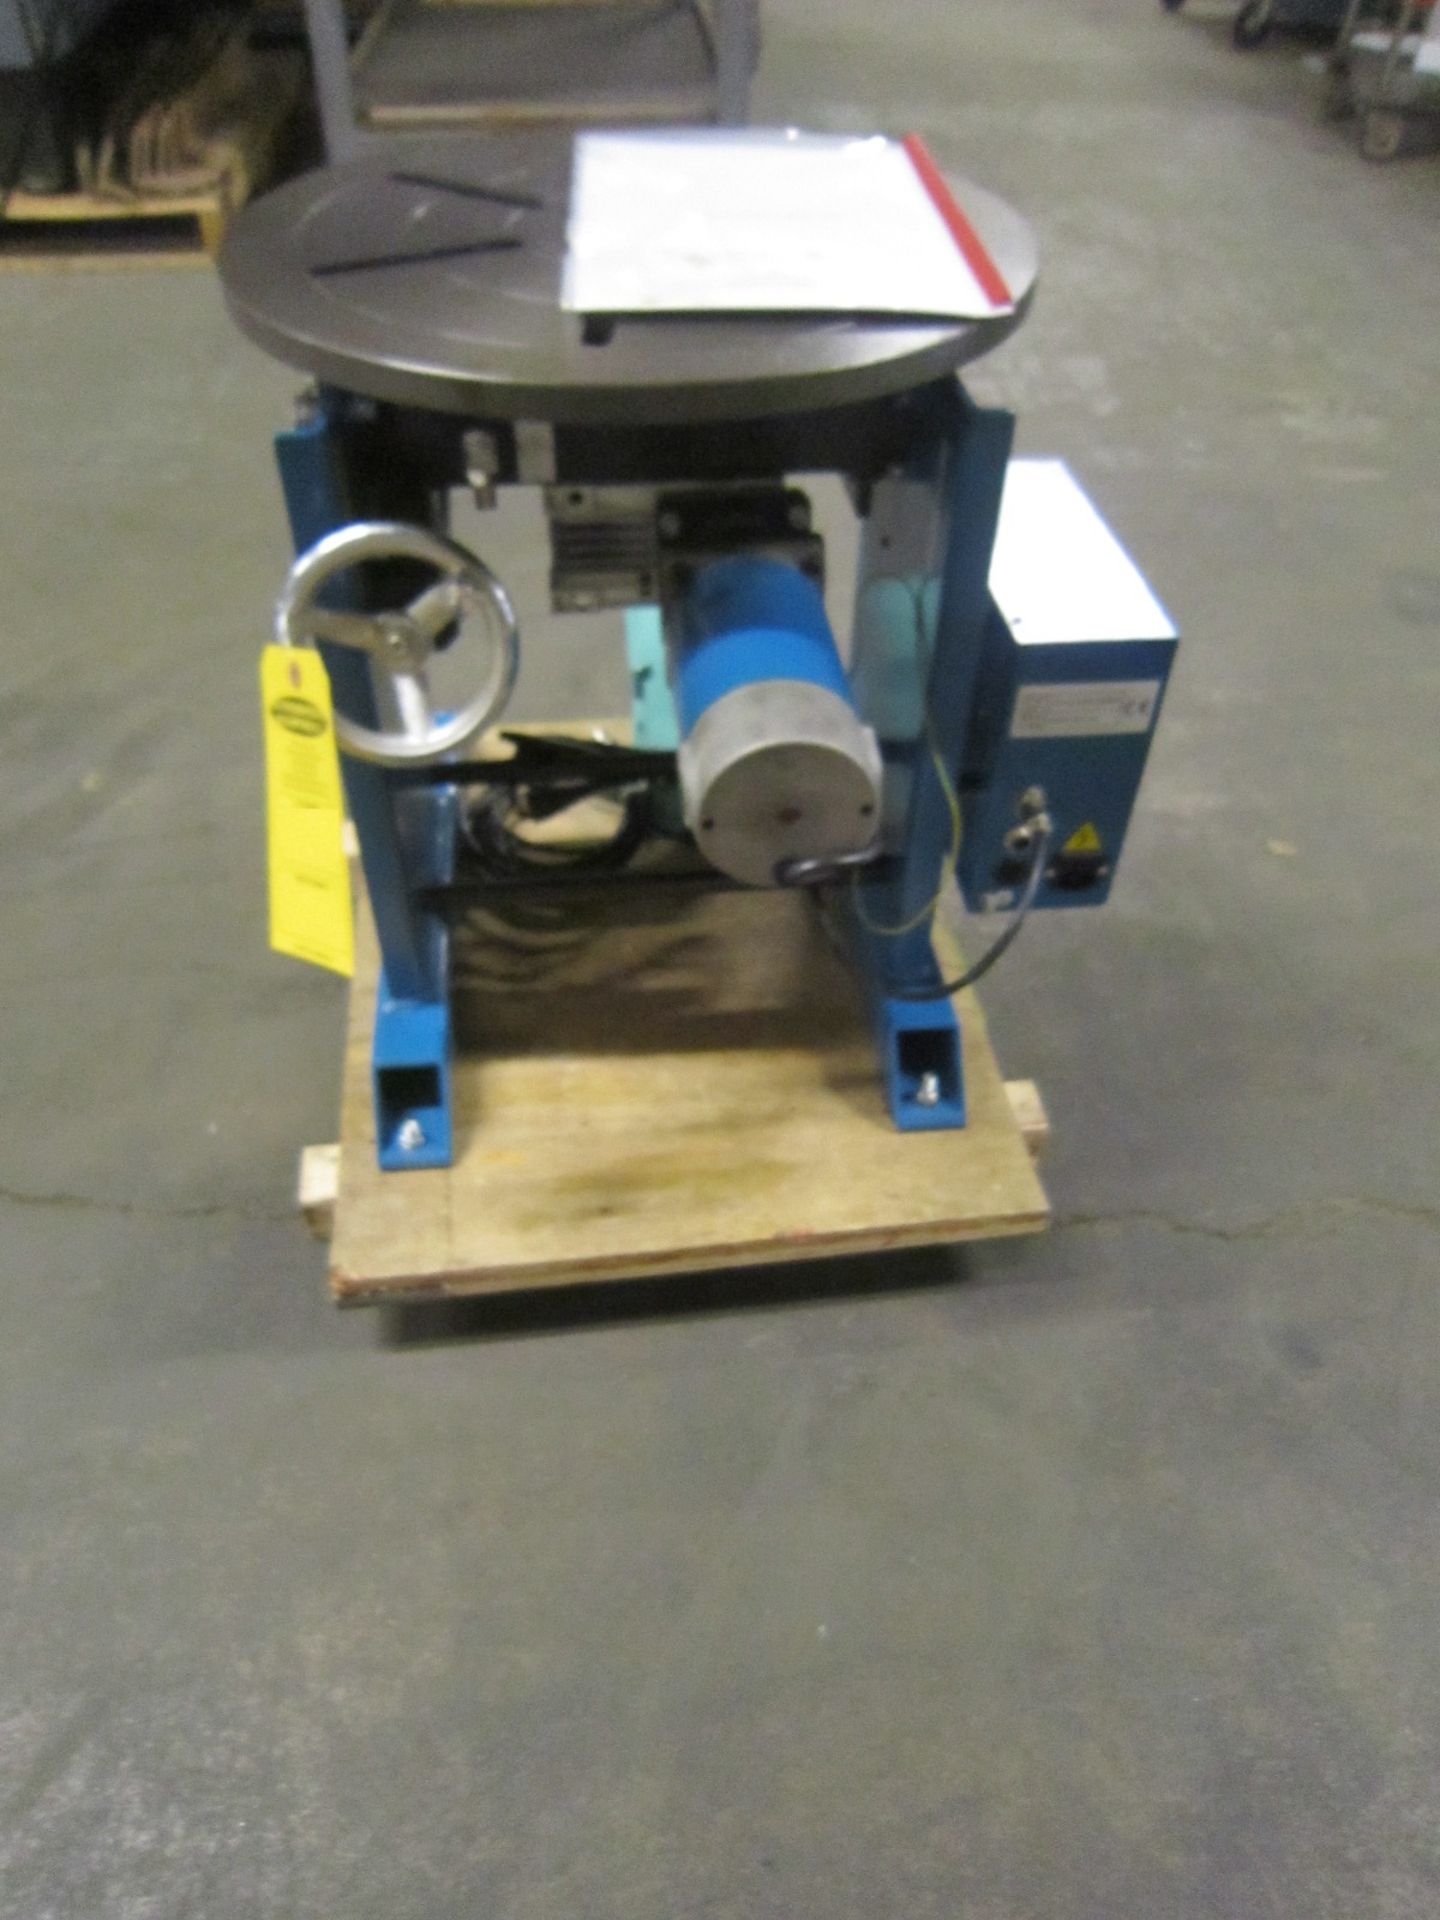 Verner model VD-700 WELDING POSITIONER 700lbs capacity - tilt and rotate with variable speed drive